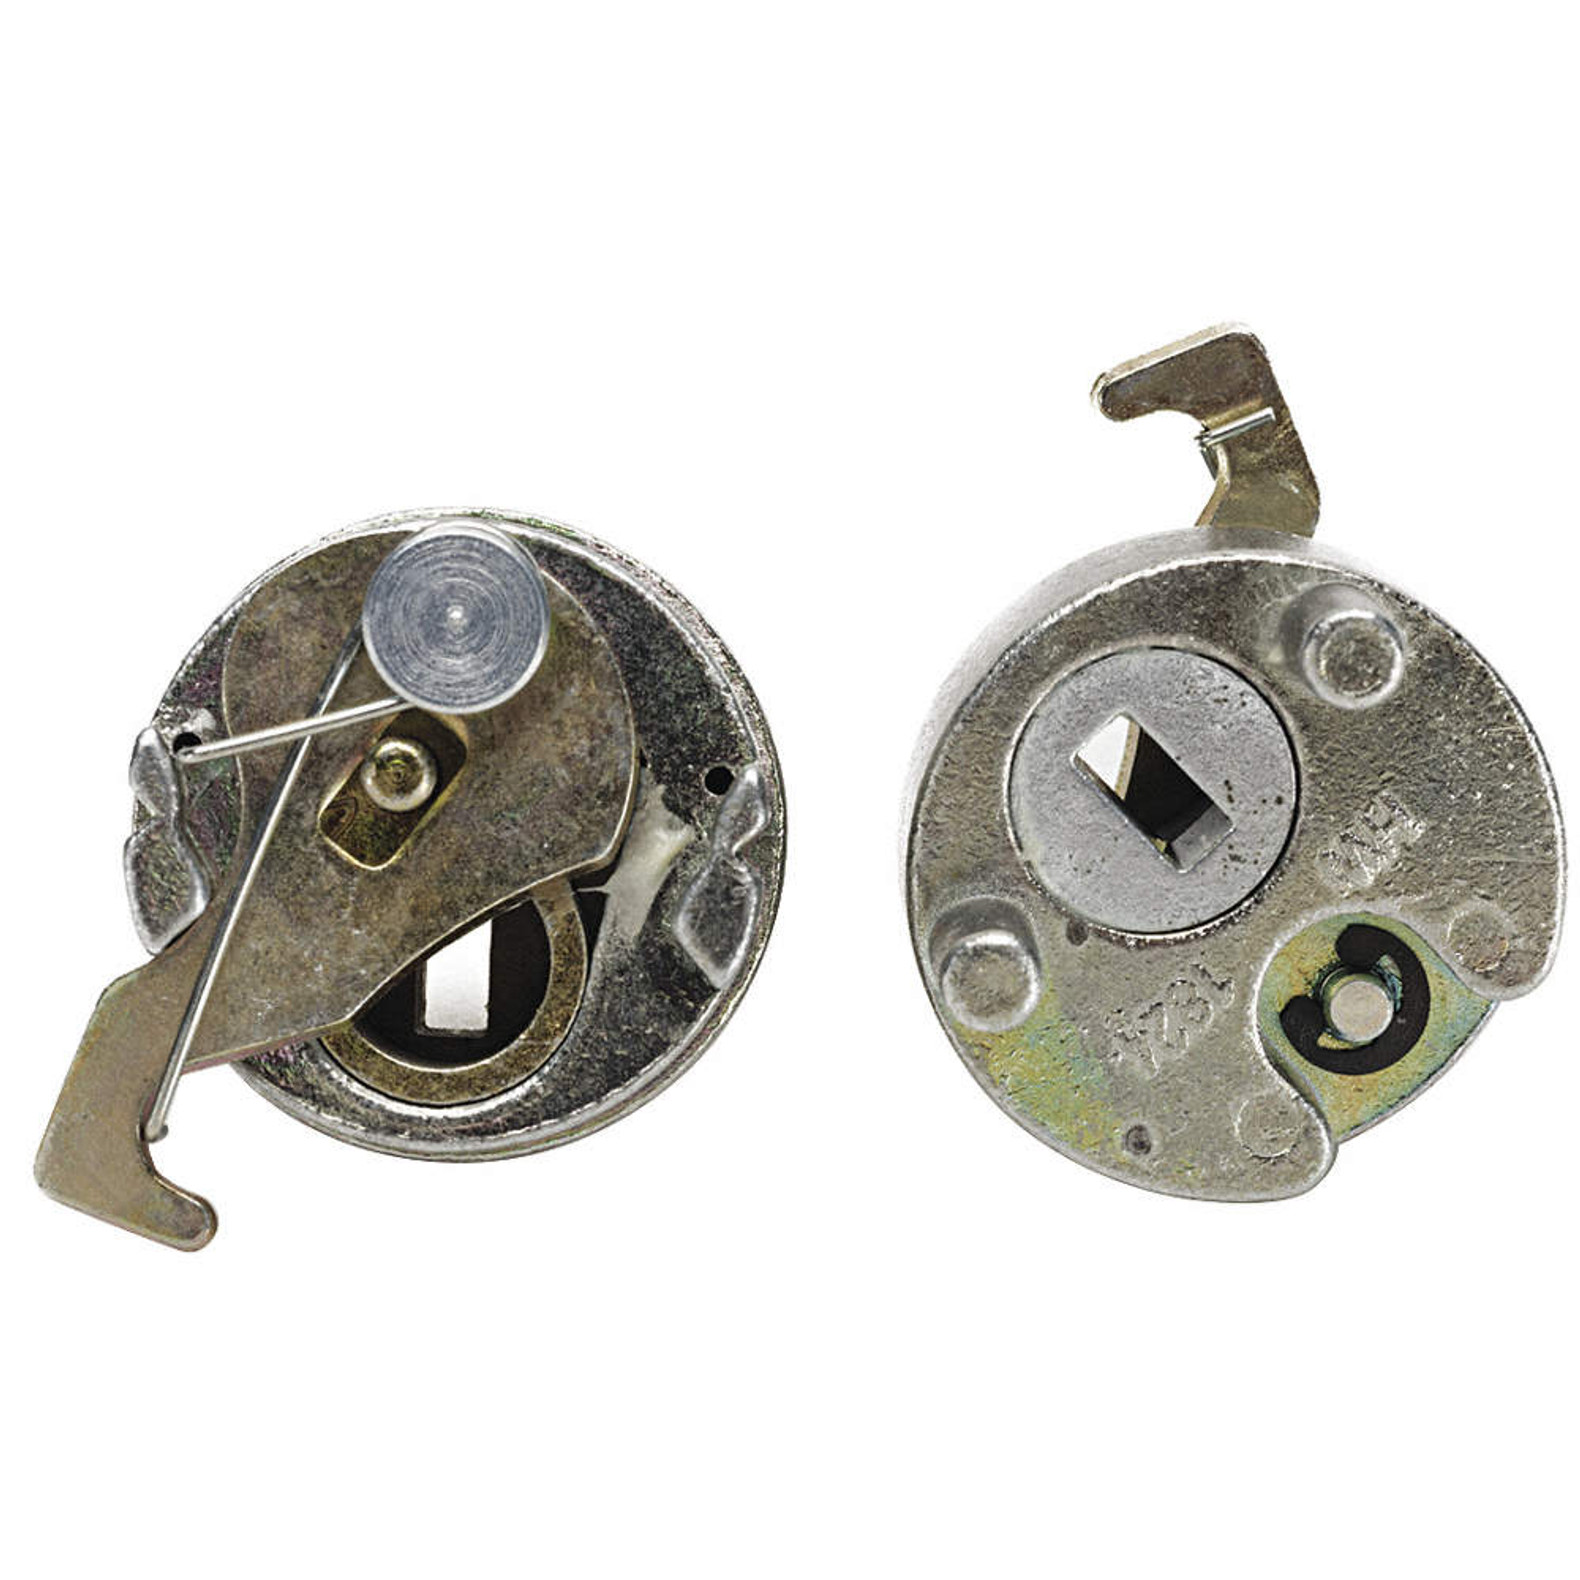 Alarm Lock S6188 Cam Assemblies DL1200/Dl1300 Trilogy series Hw1824 Left  Hand and Right Hand